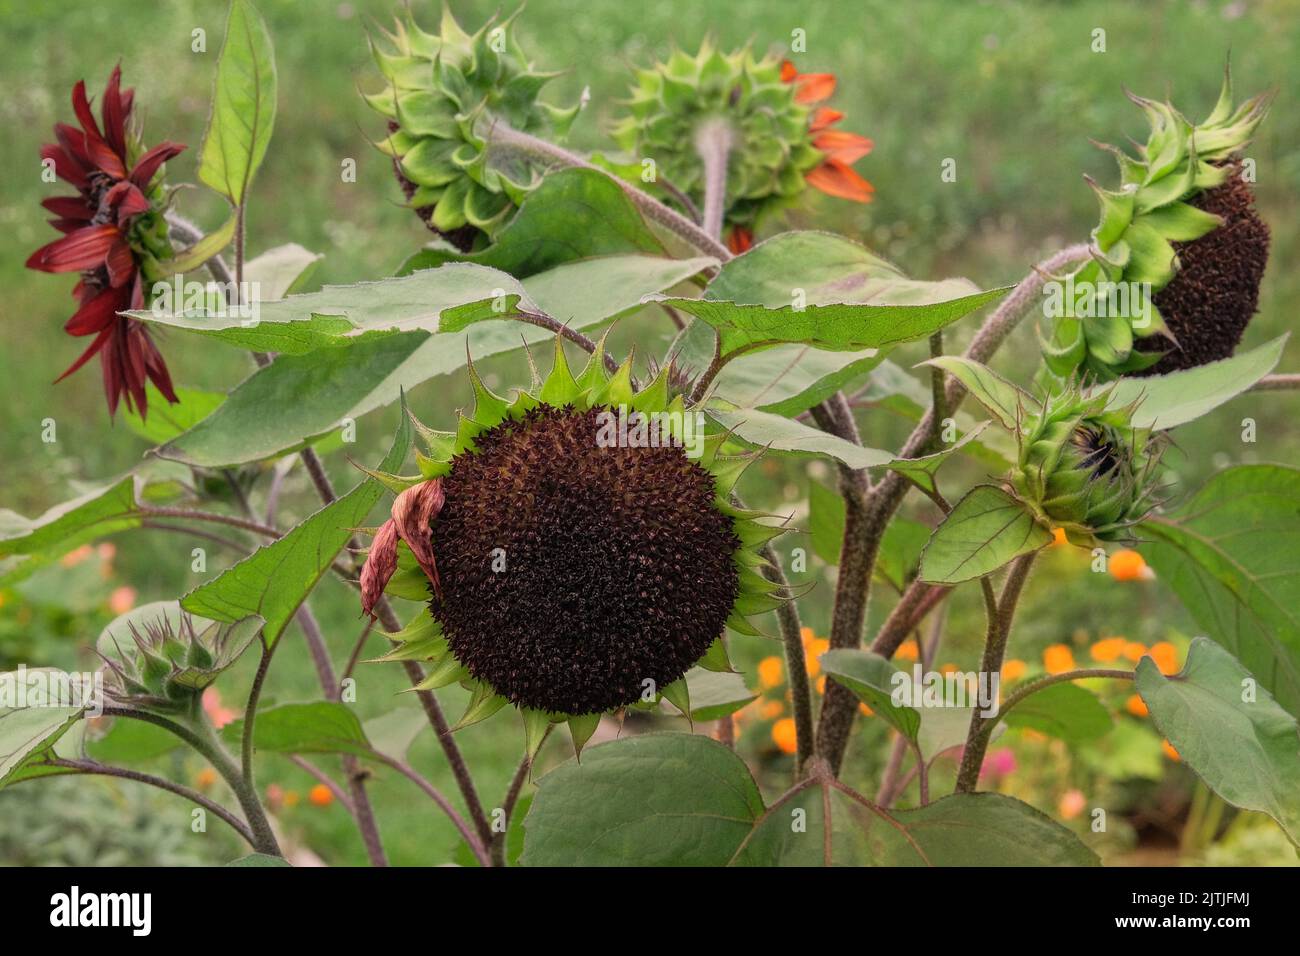 Sunflowers is growing in rural garden. Farming background. Decorative flowers. Stock Photo